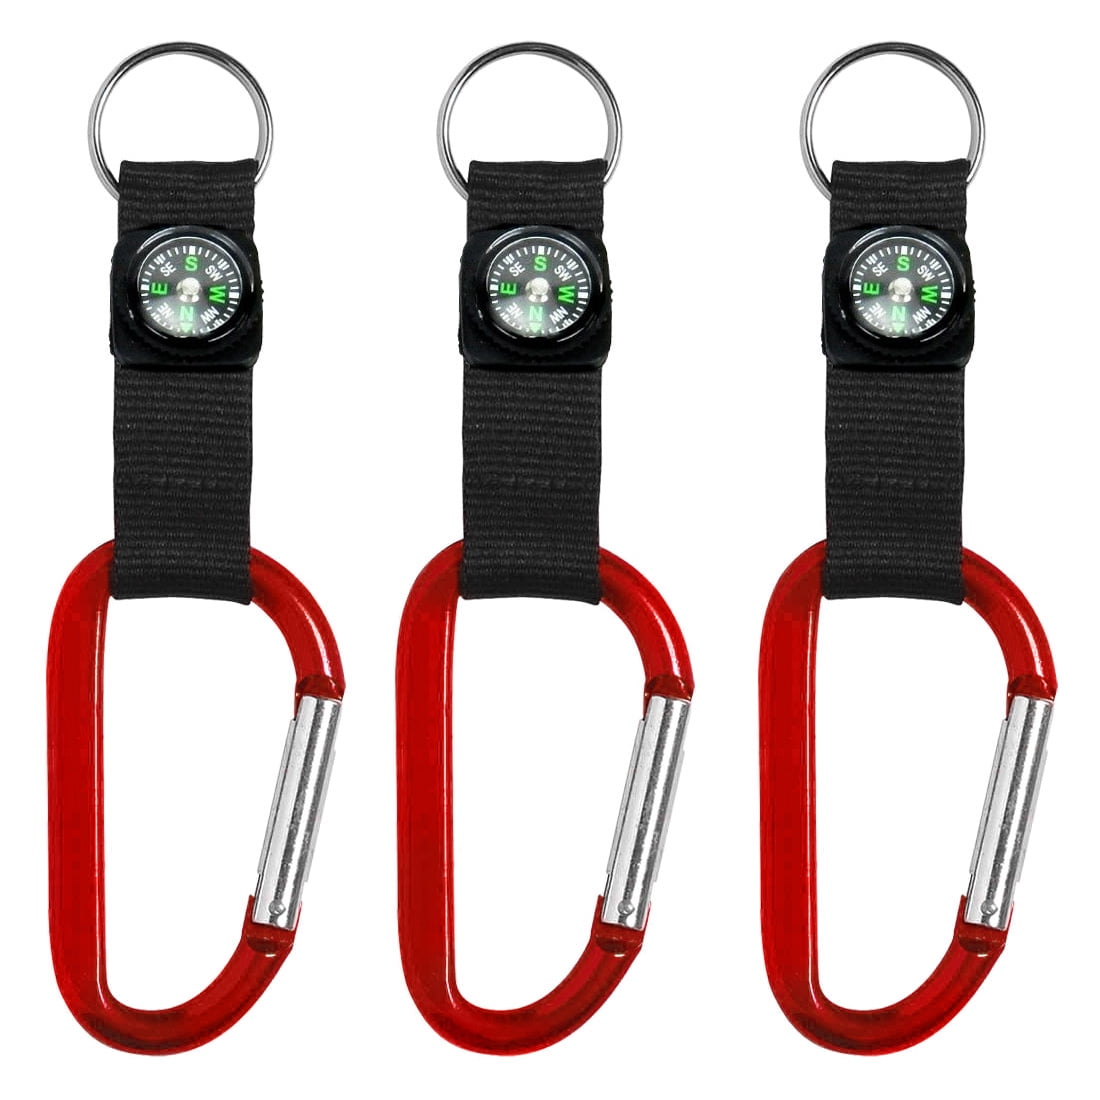 1Pc Compass 3-in-1 Carabiner Clip Keychain Caming Hiking Climbing Outdoor Travelling Tool 